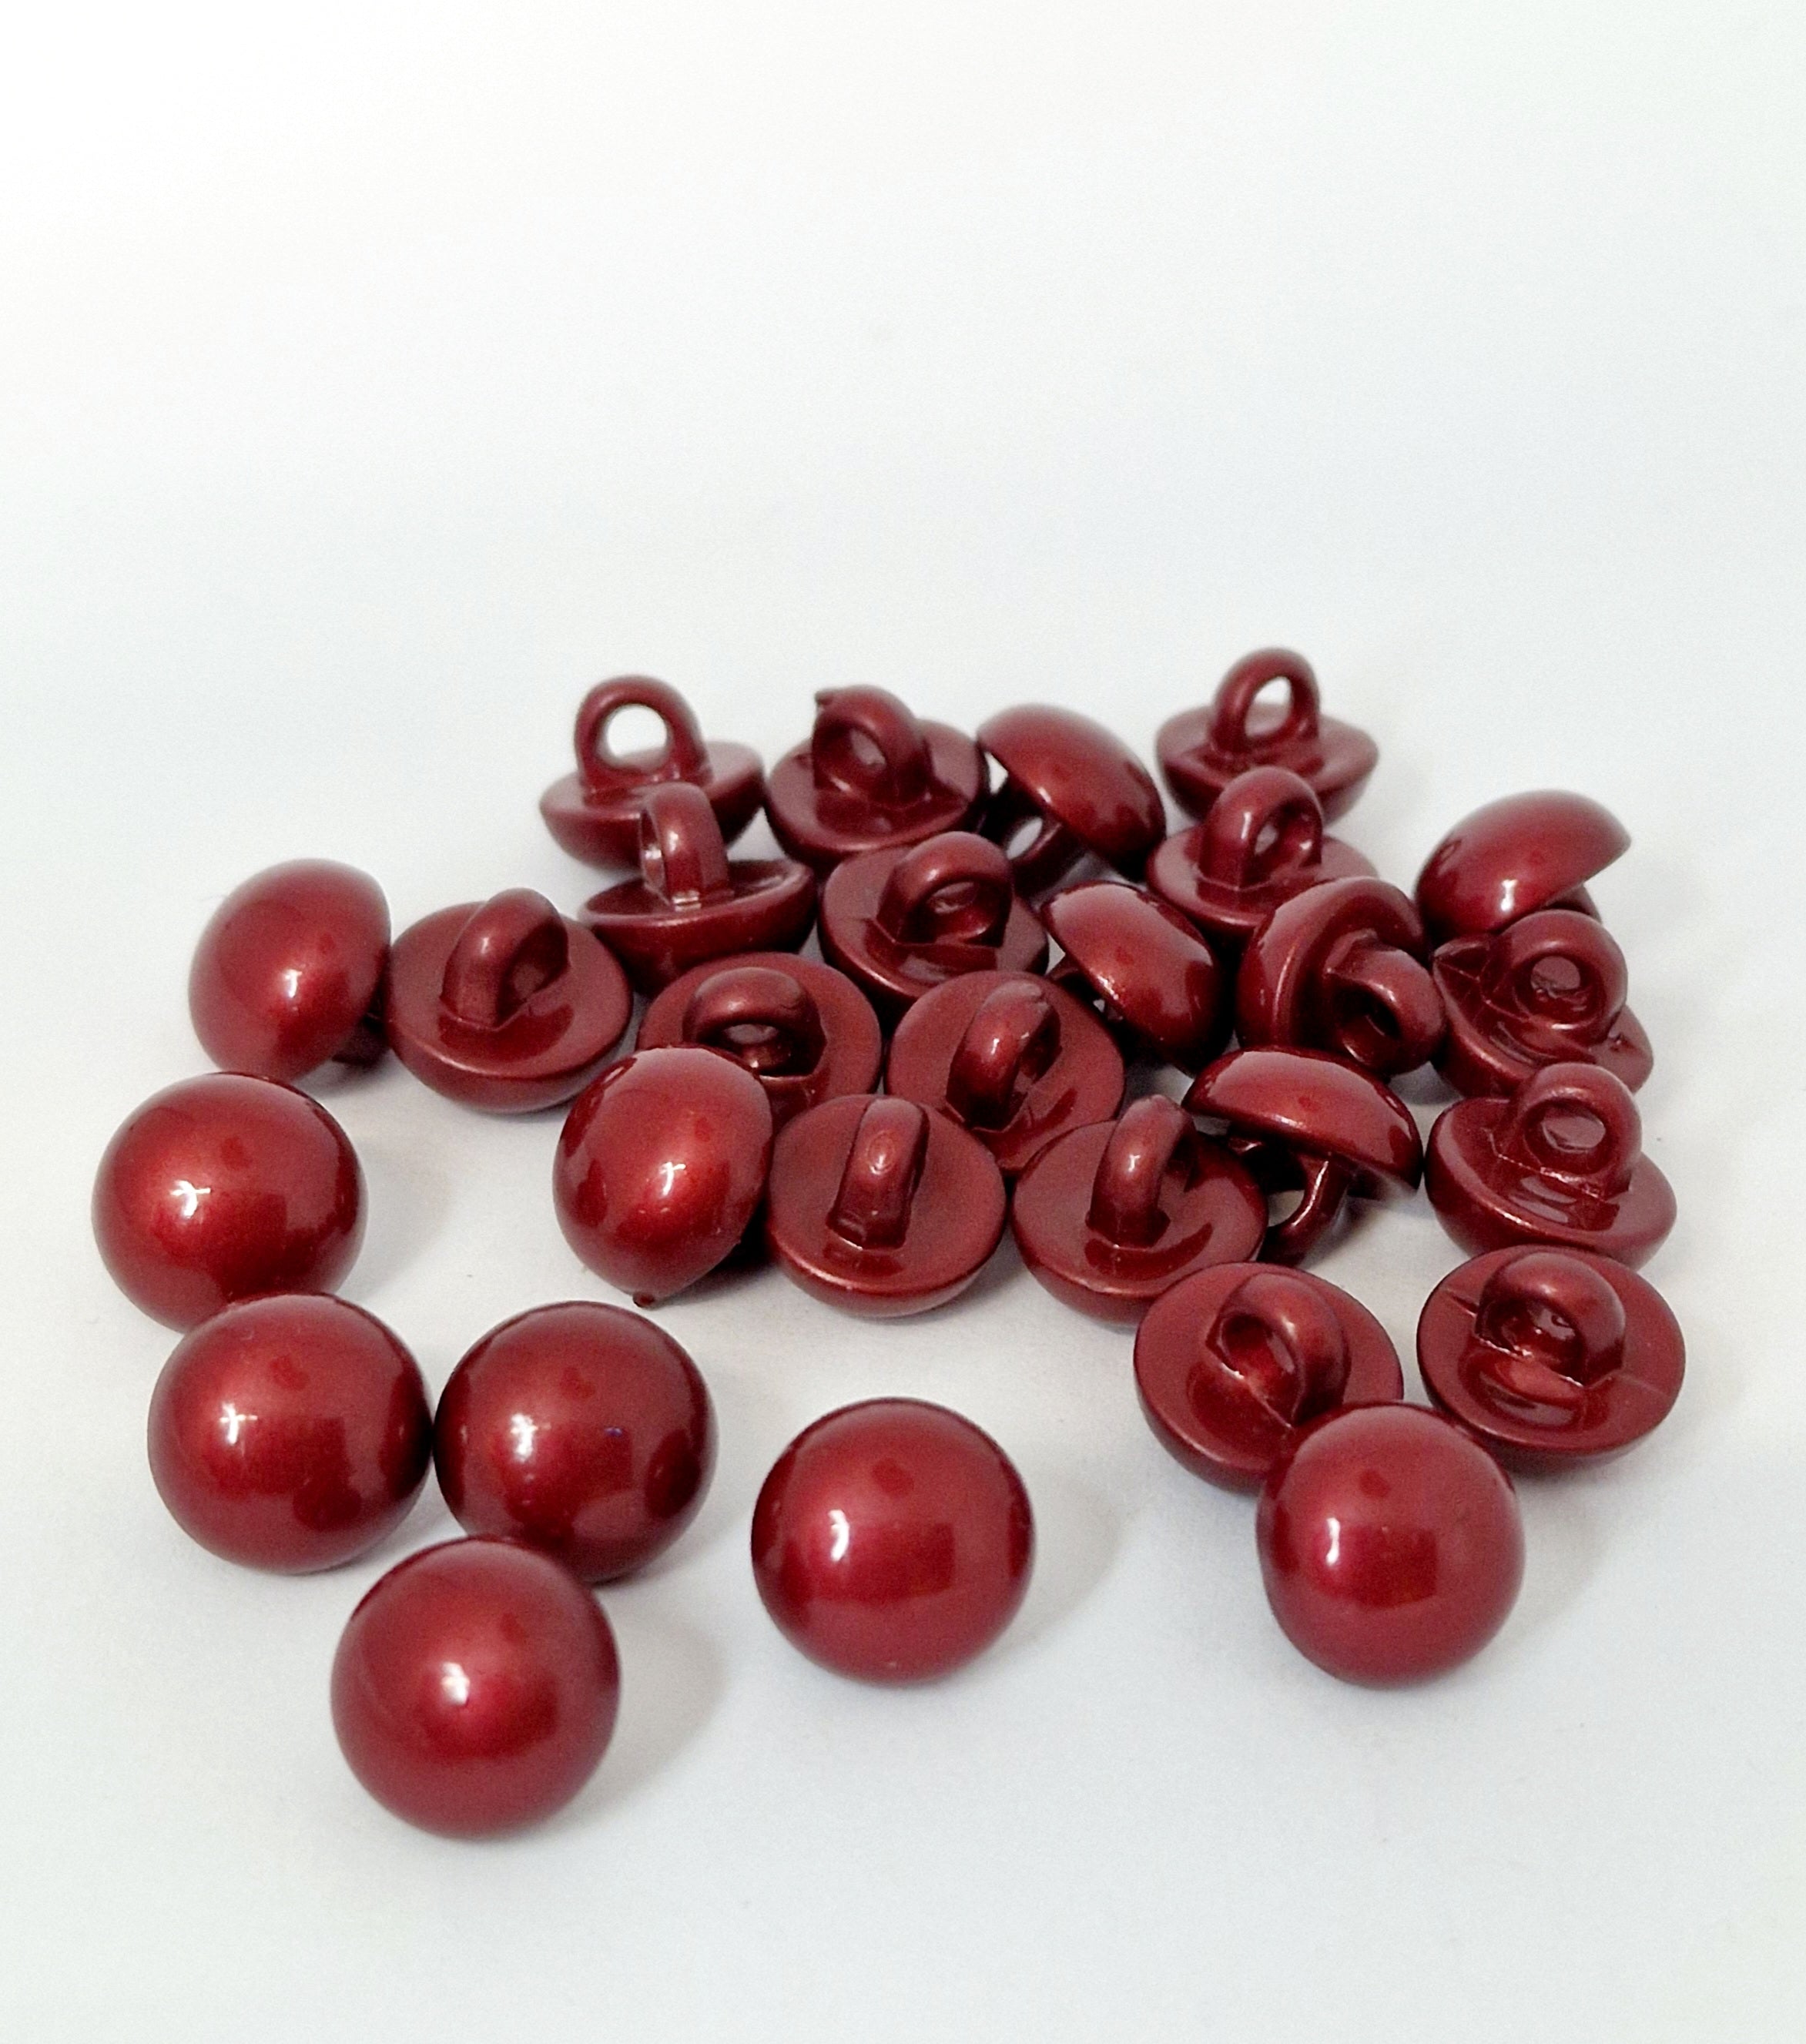 MajorCrafts 24pcs 11mm Burgundy Red High-Grade Acrylic Small Round Sewing Mushroom Shank Buttons